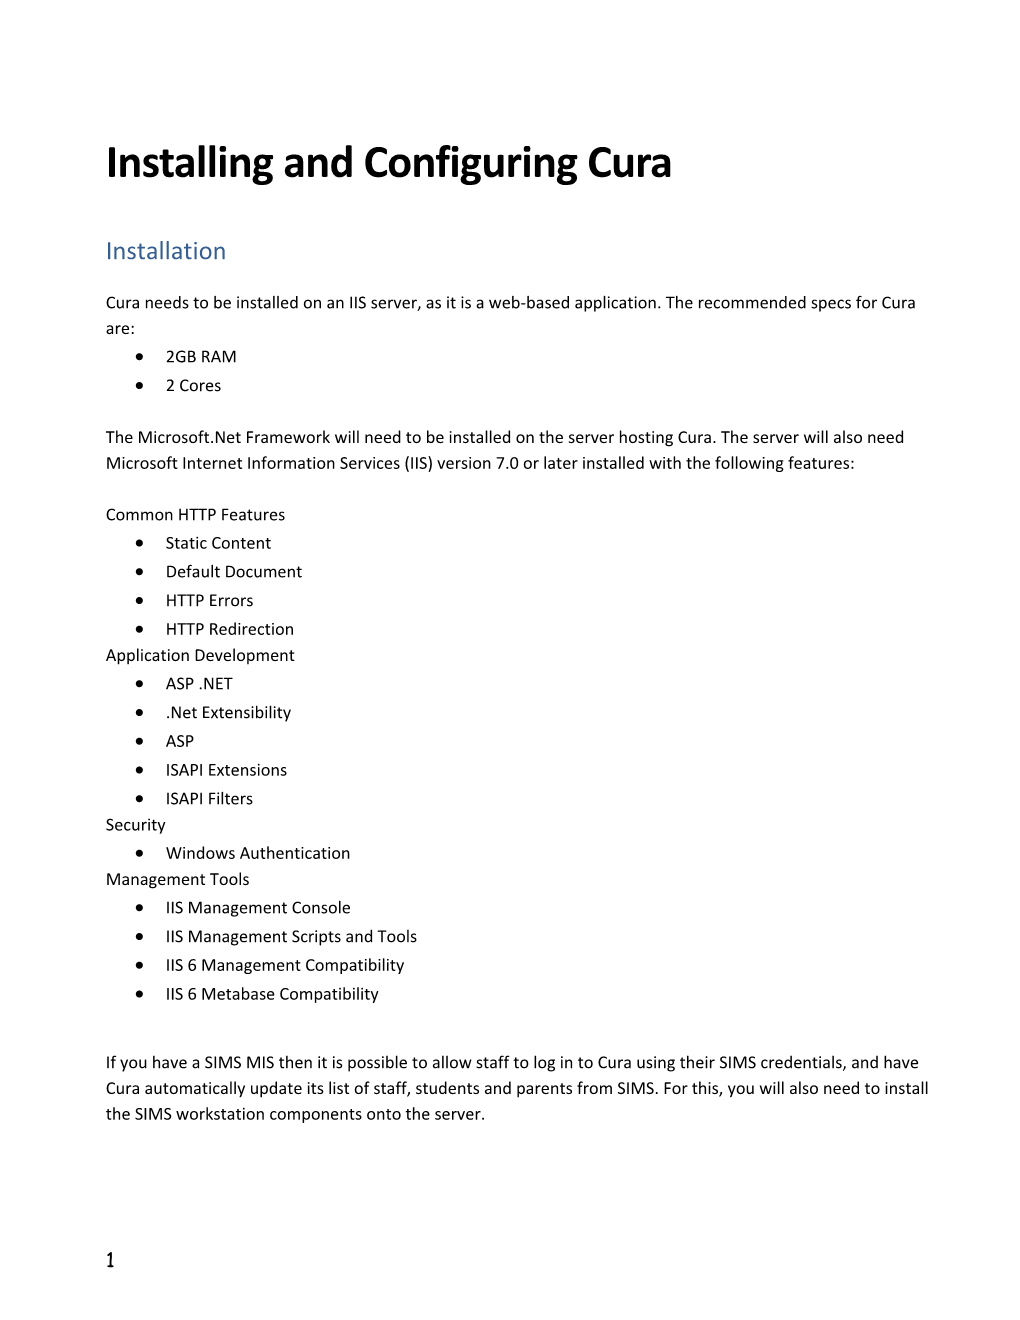 Installing and Configuring Cura